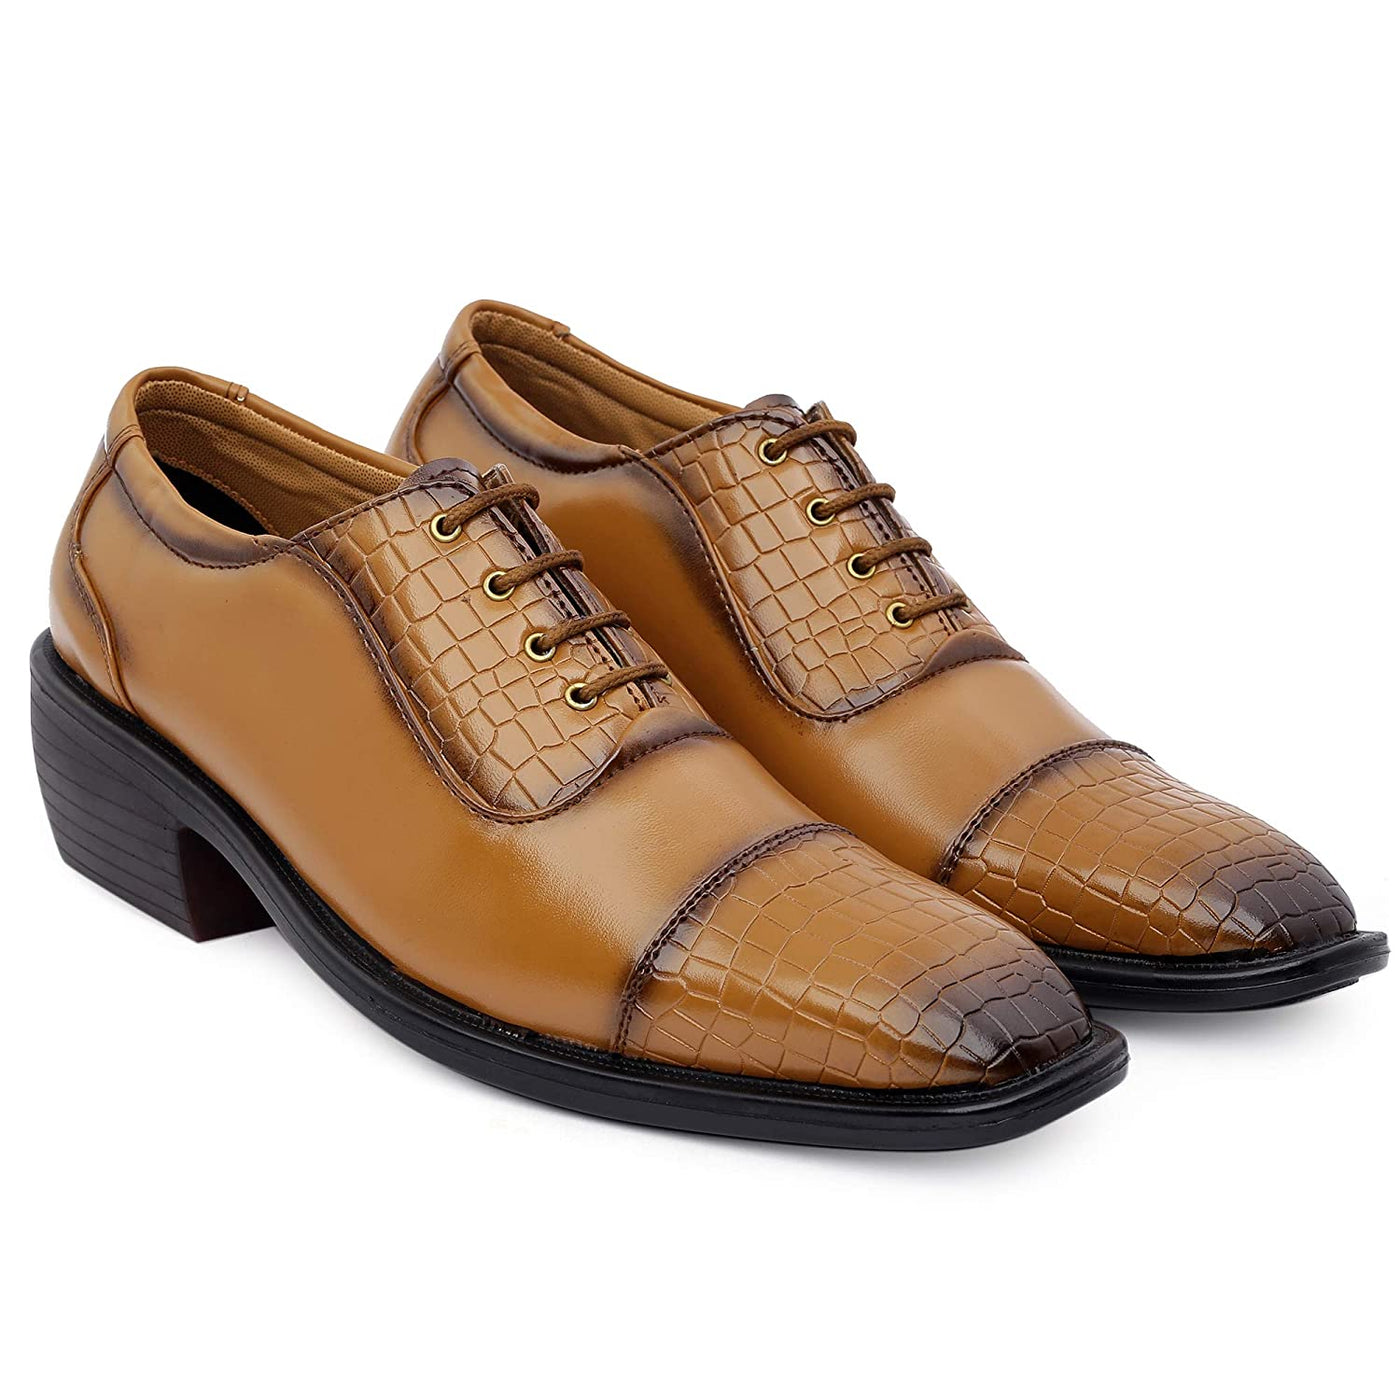 Stylish Tan Formal and Casual Wear Lace-Up Shoes With Height Increasing Heel-Unique and Classy